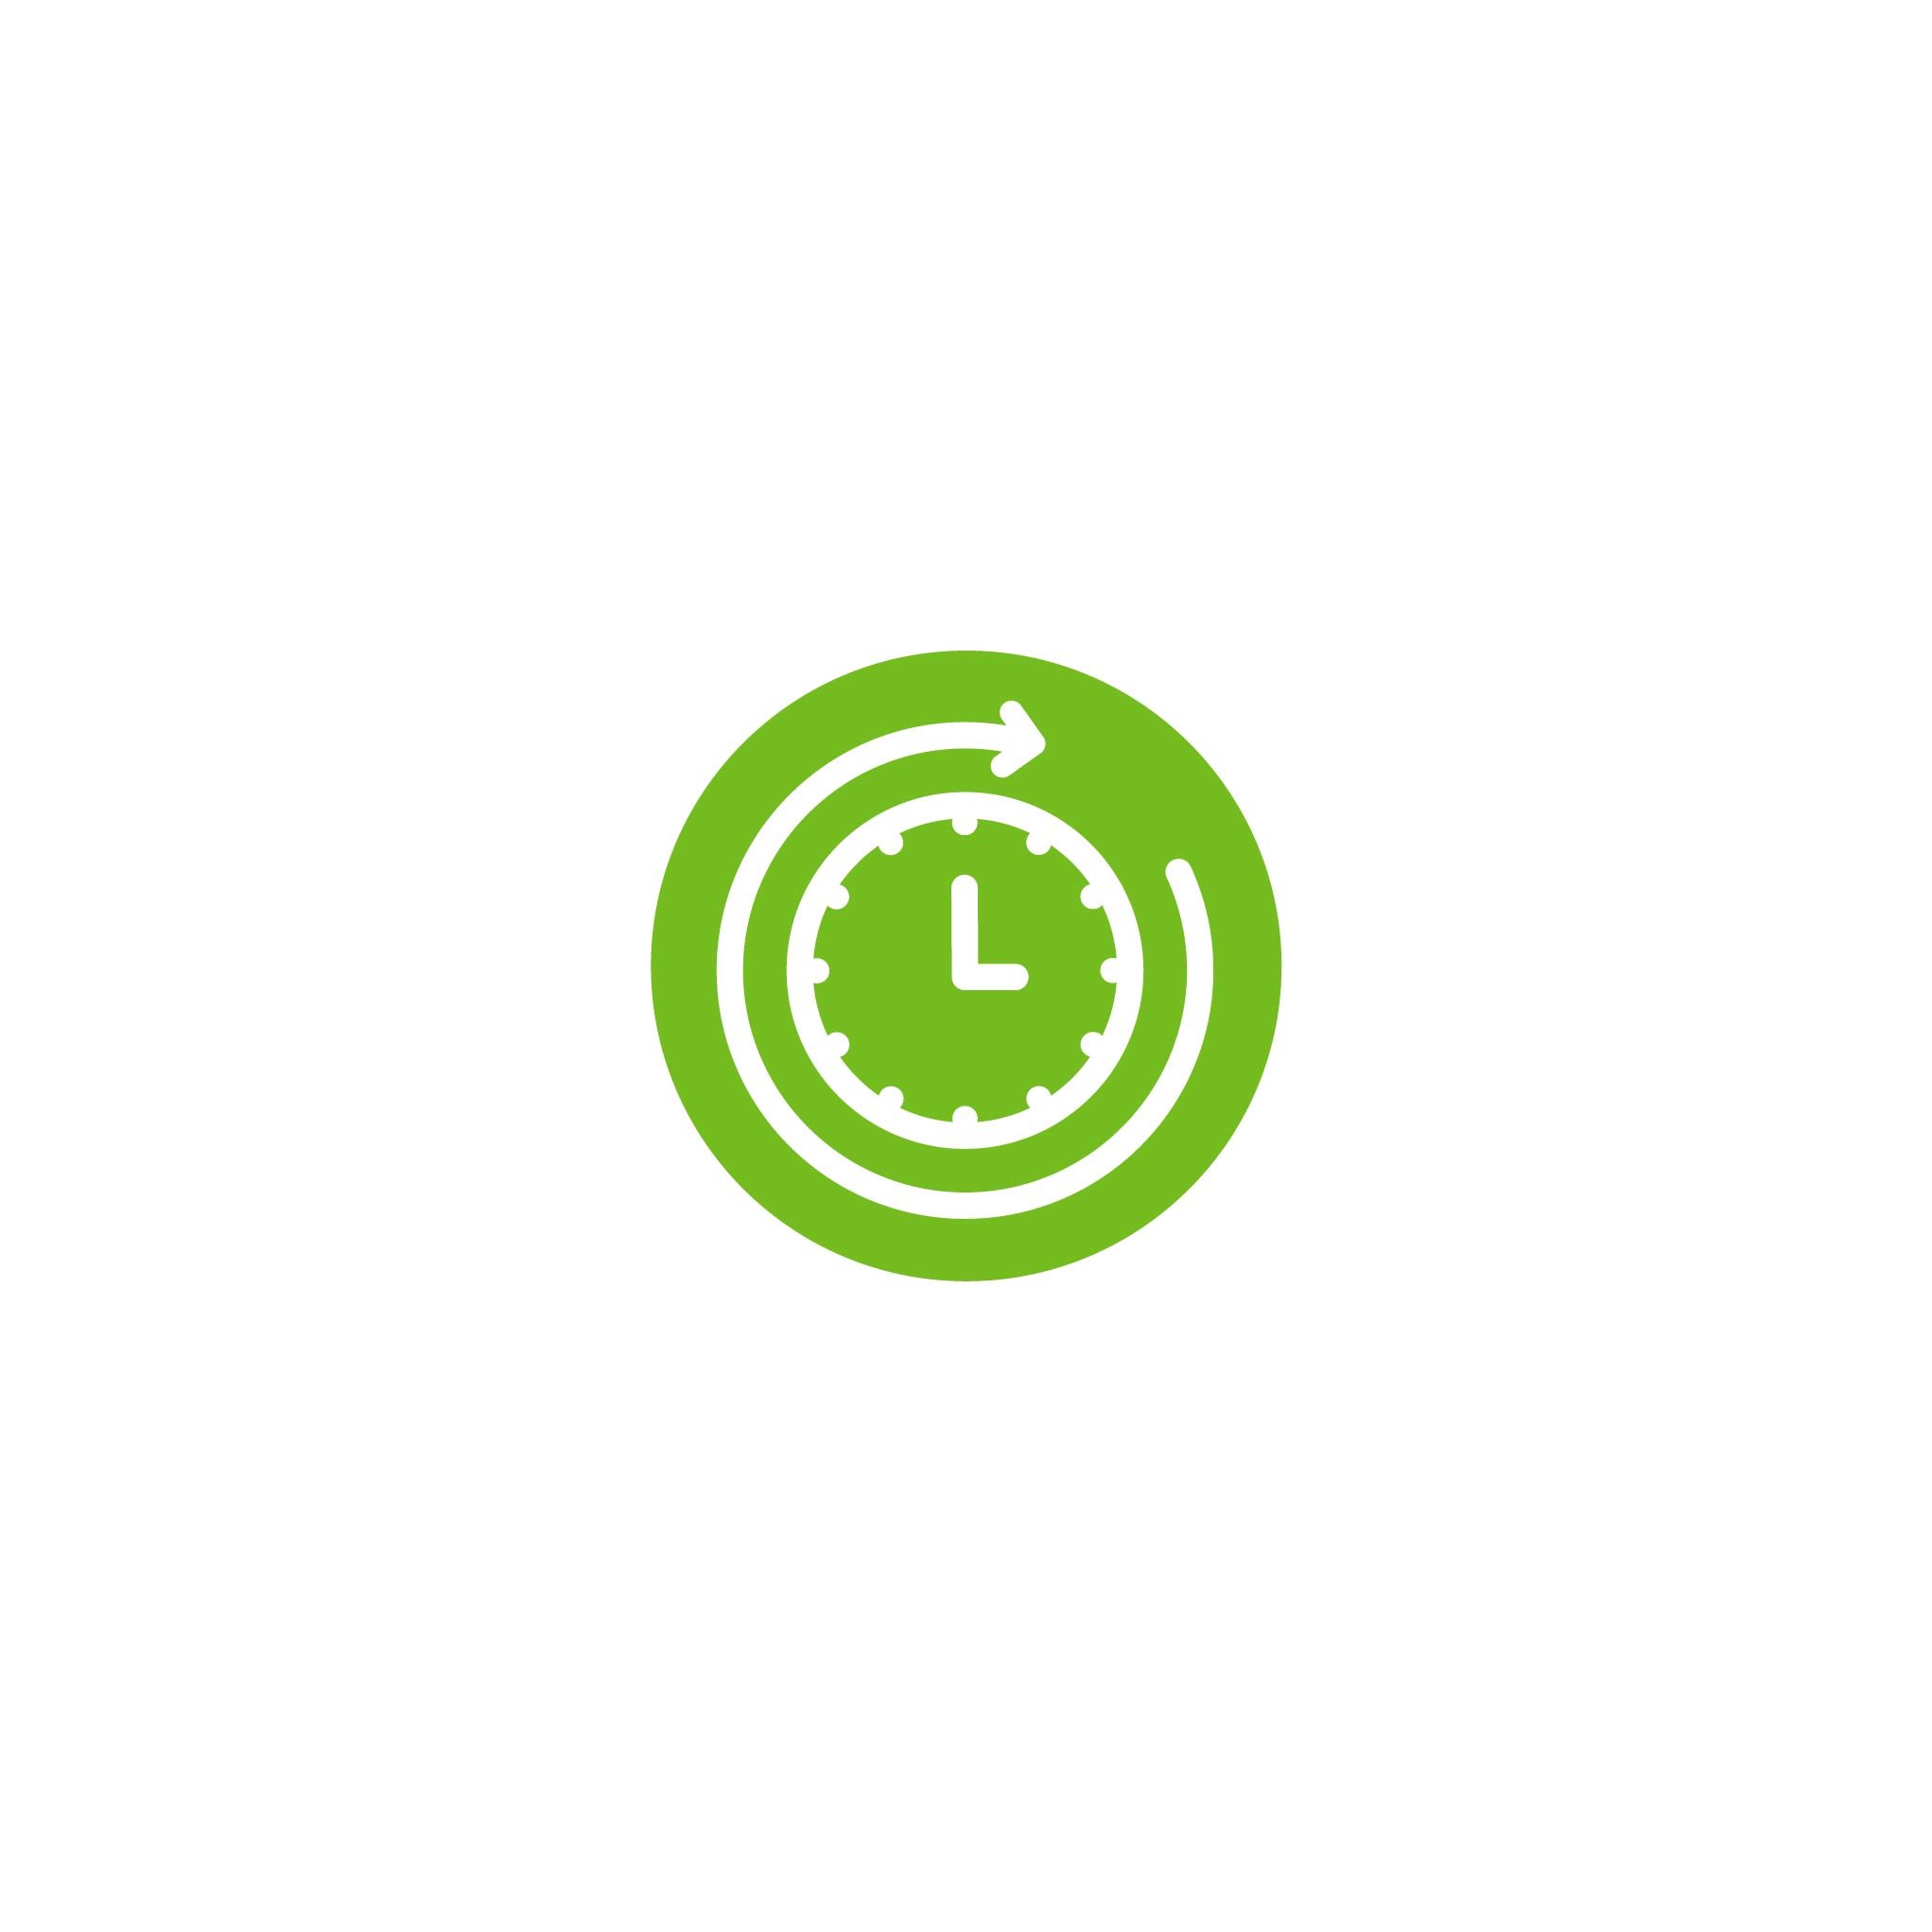 advice on your schedule - clock icon